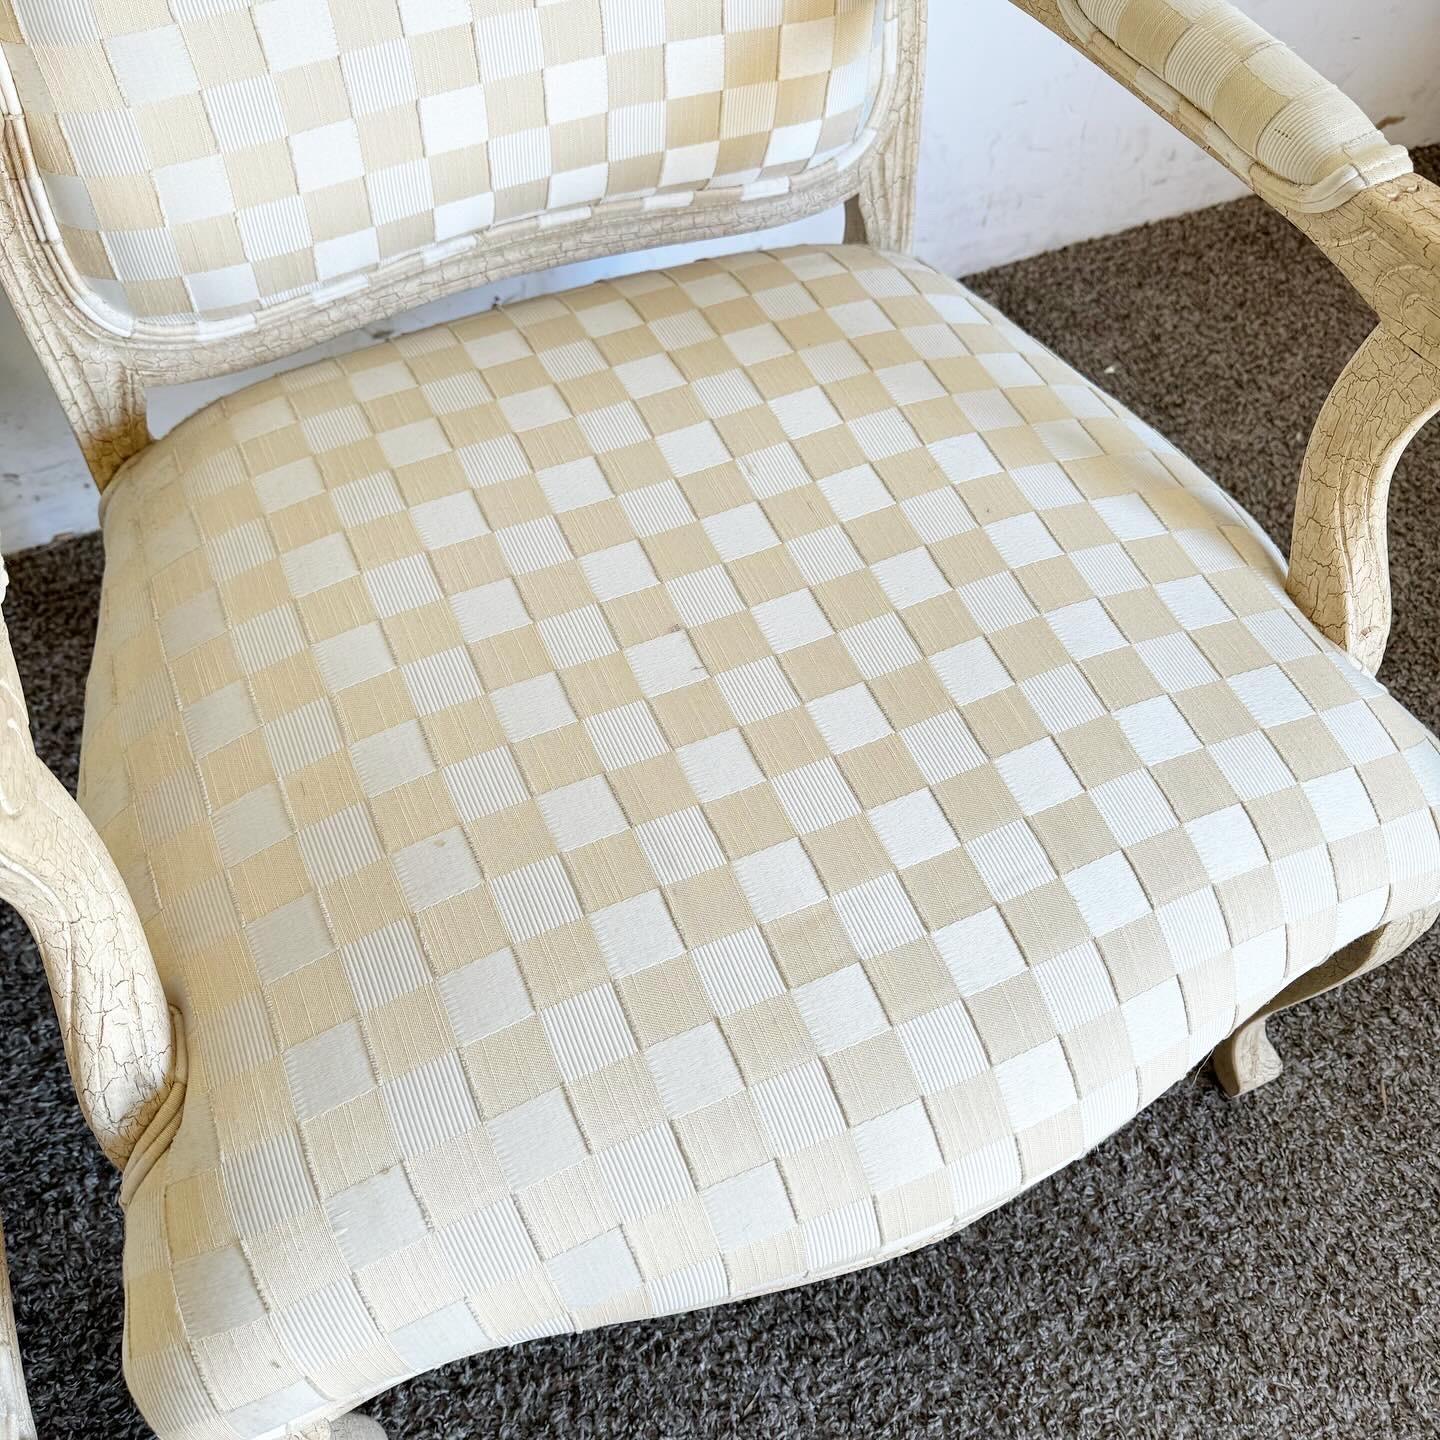 Upholstery Vintage Regency Cream Crackled Finish Arm Chairs - a Pair For Sale